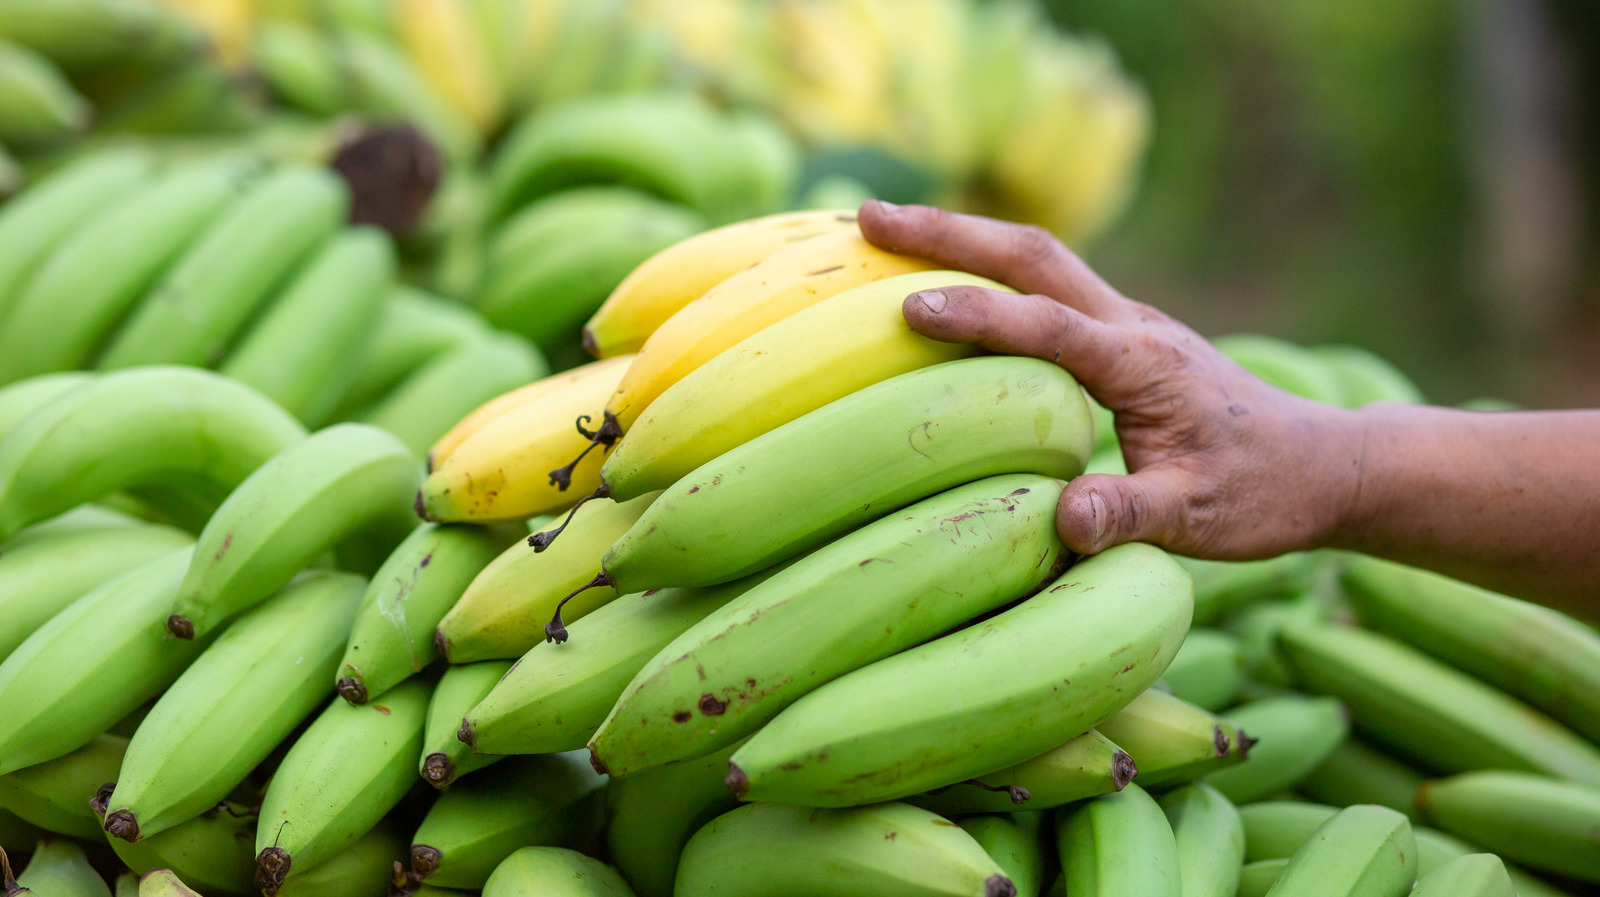 How to Keep Bananas from Ripening Too Fast